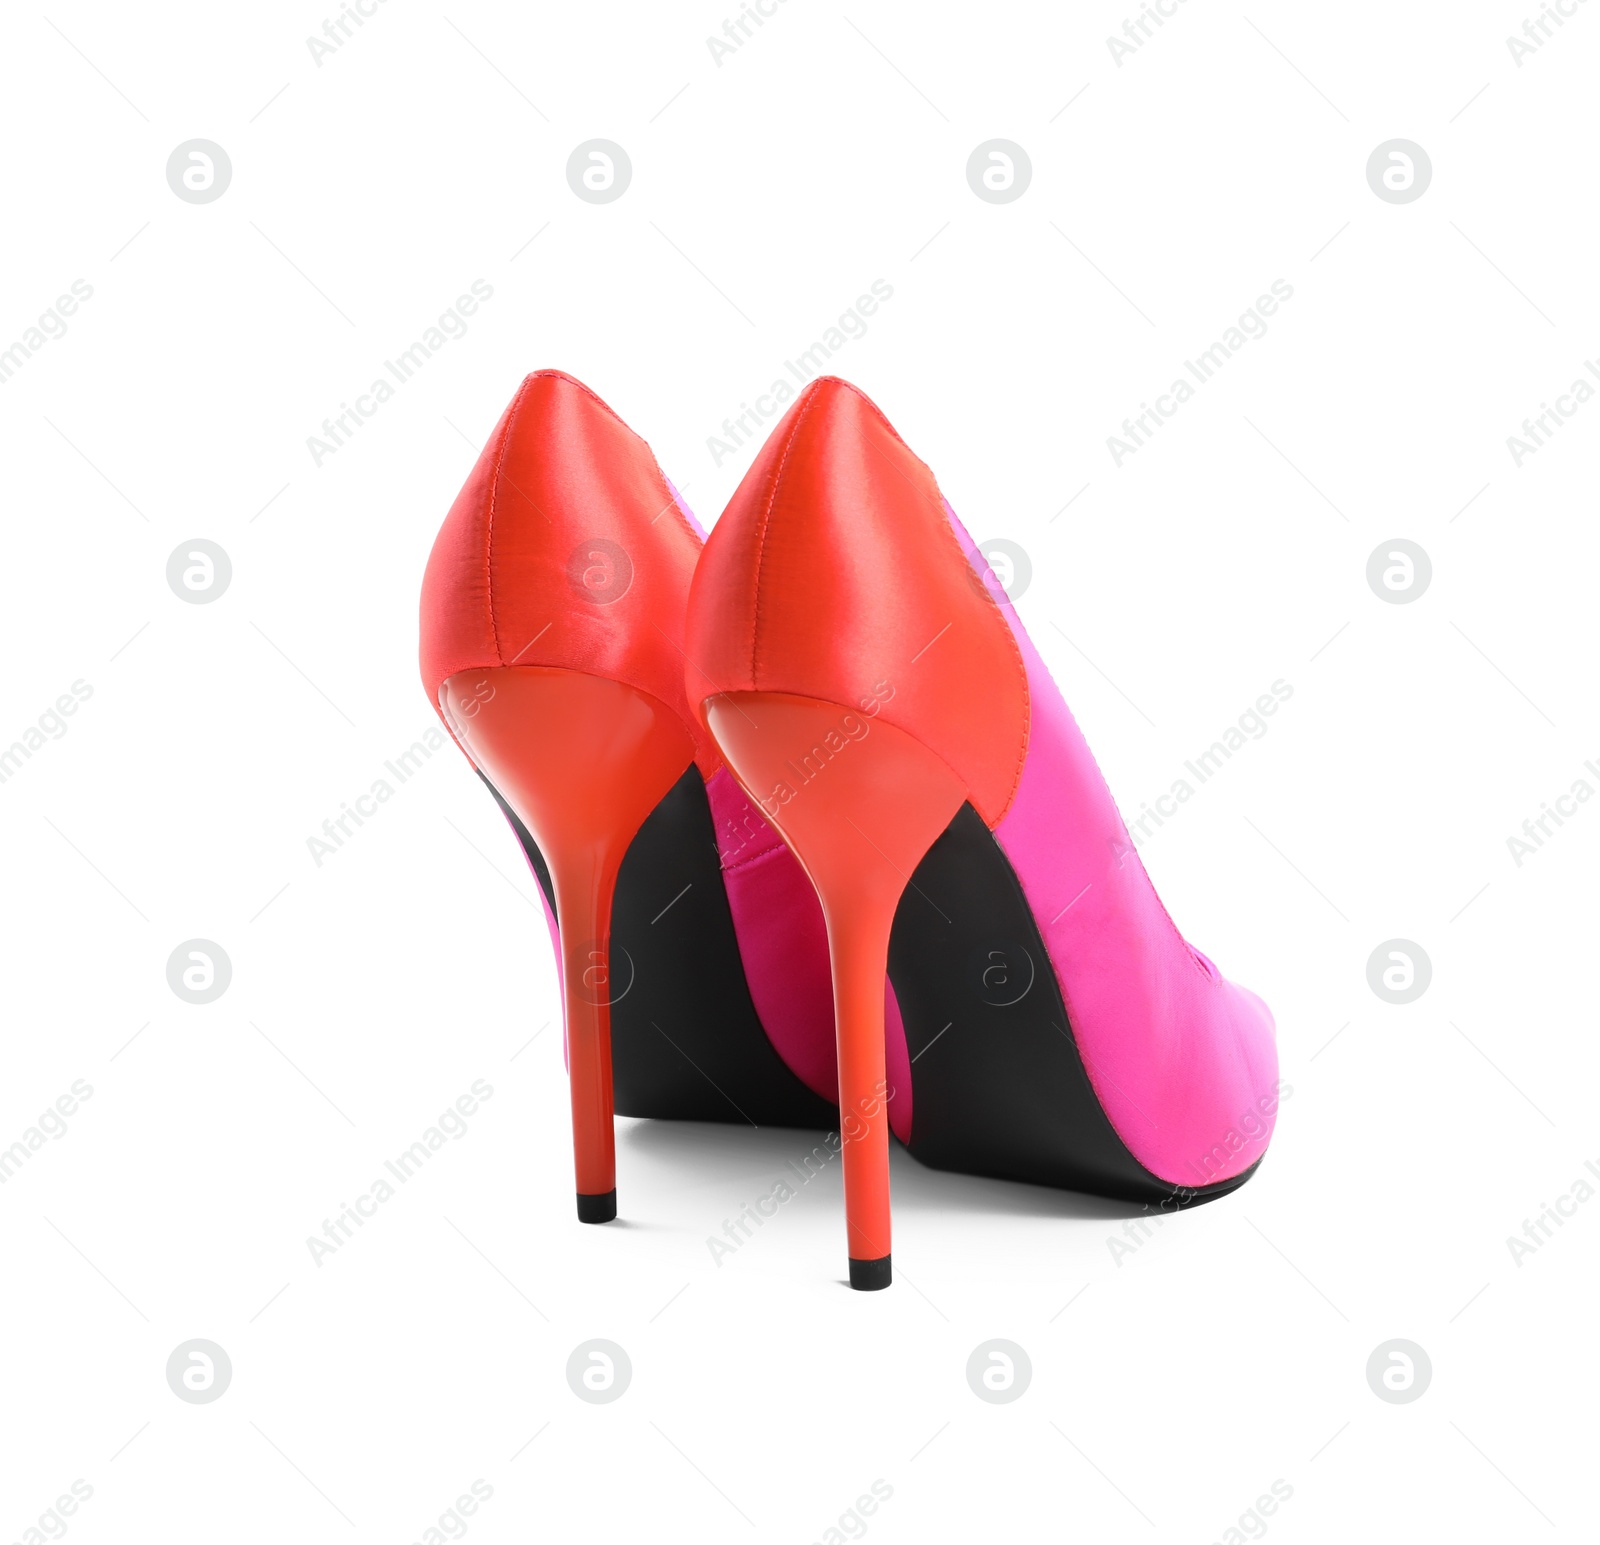 Photo of Pair of beautiful shoes on white background